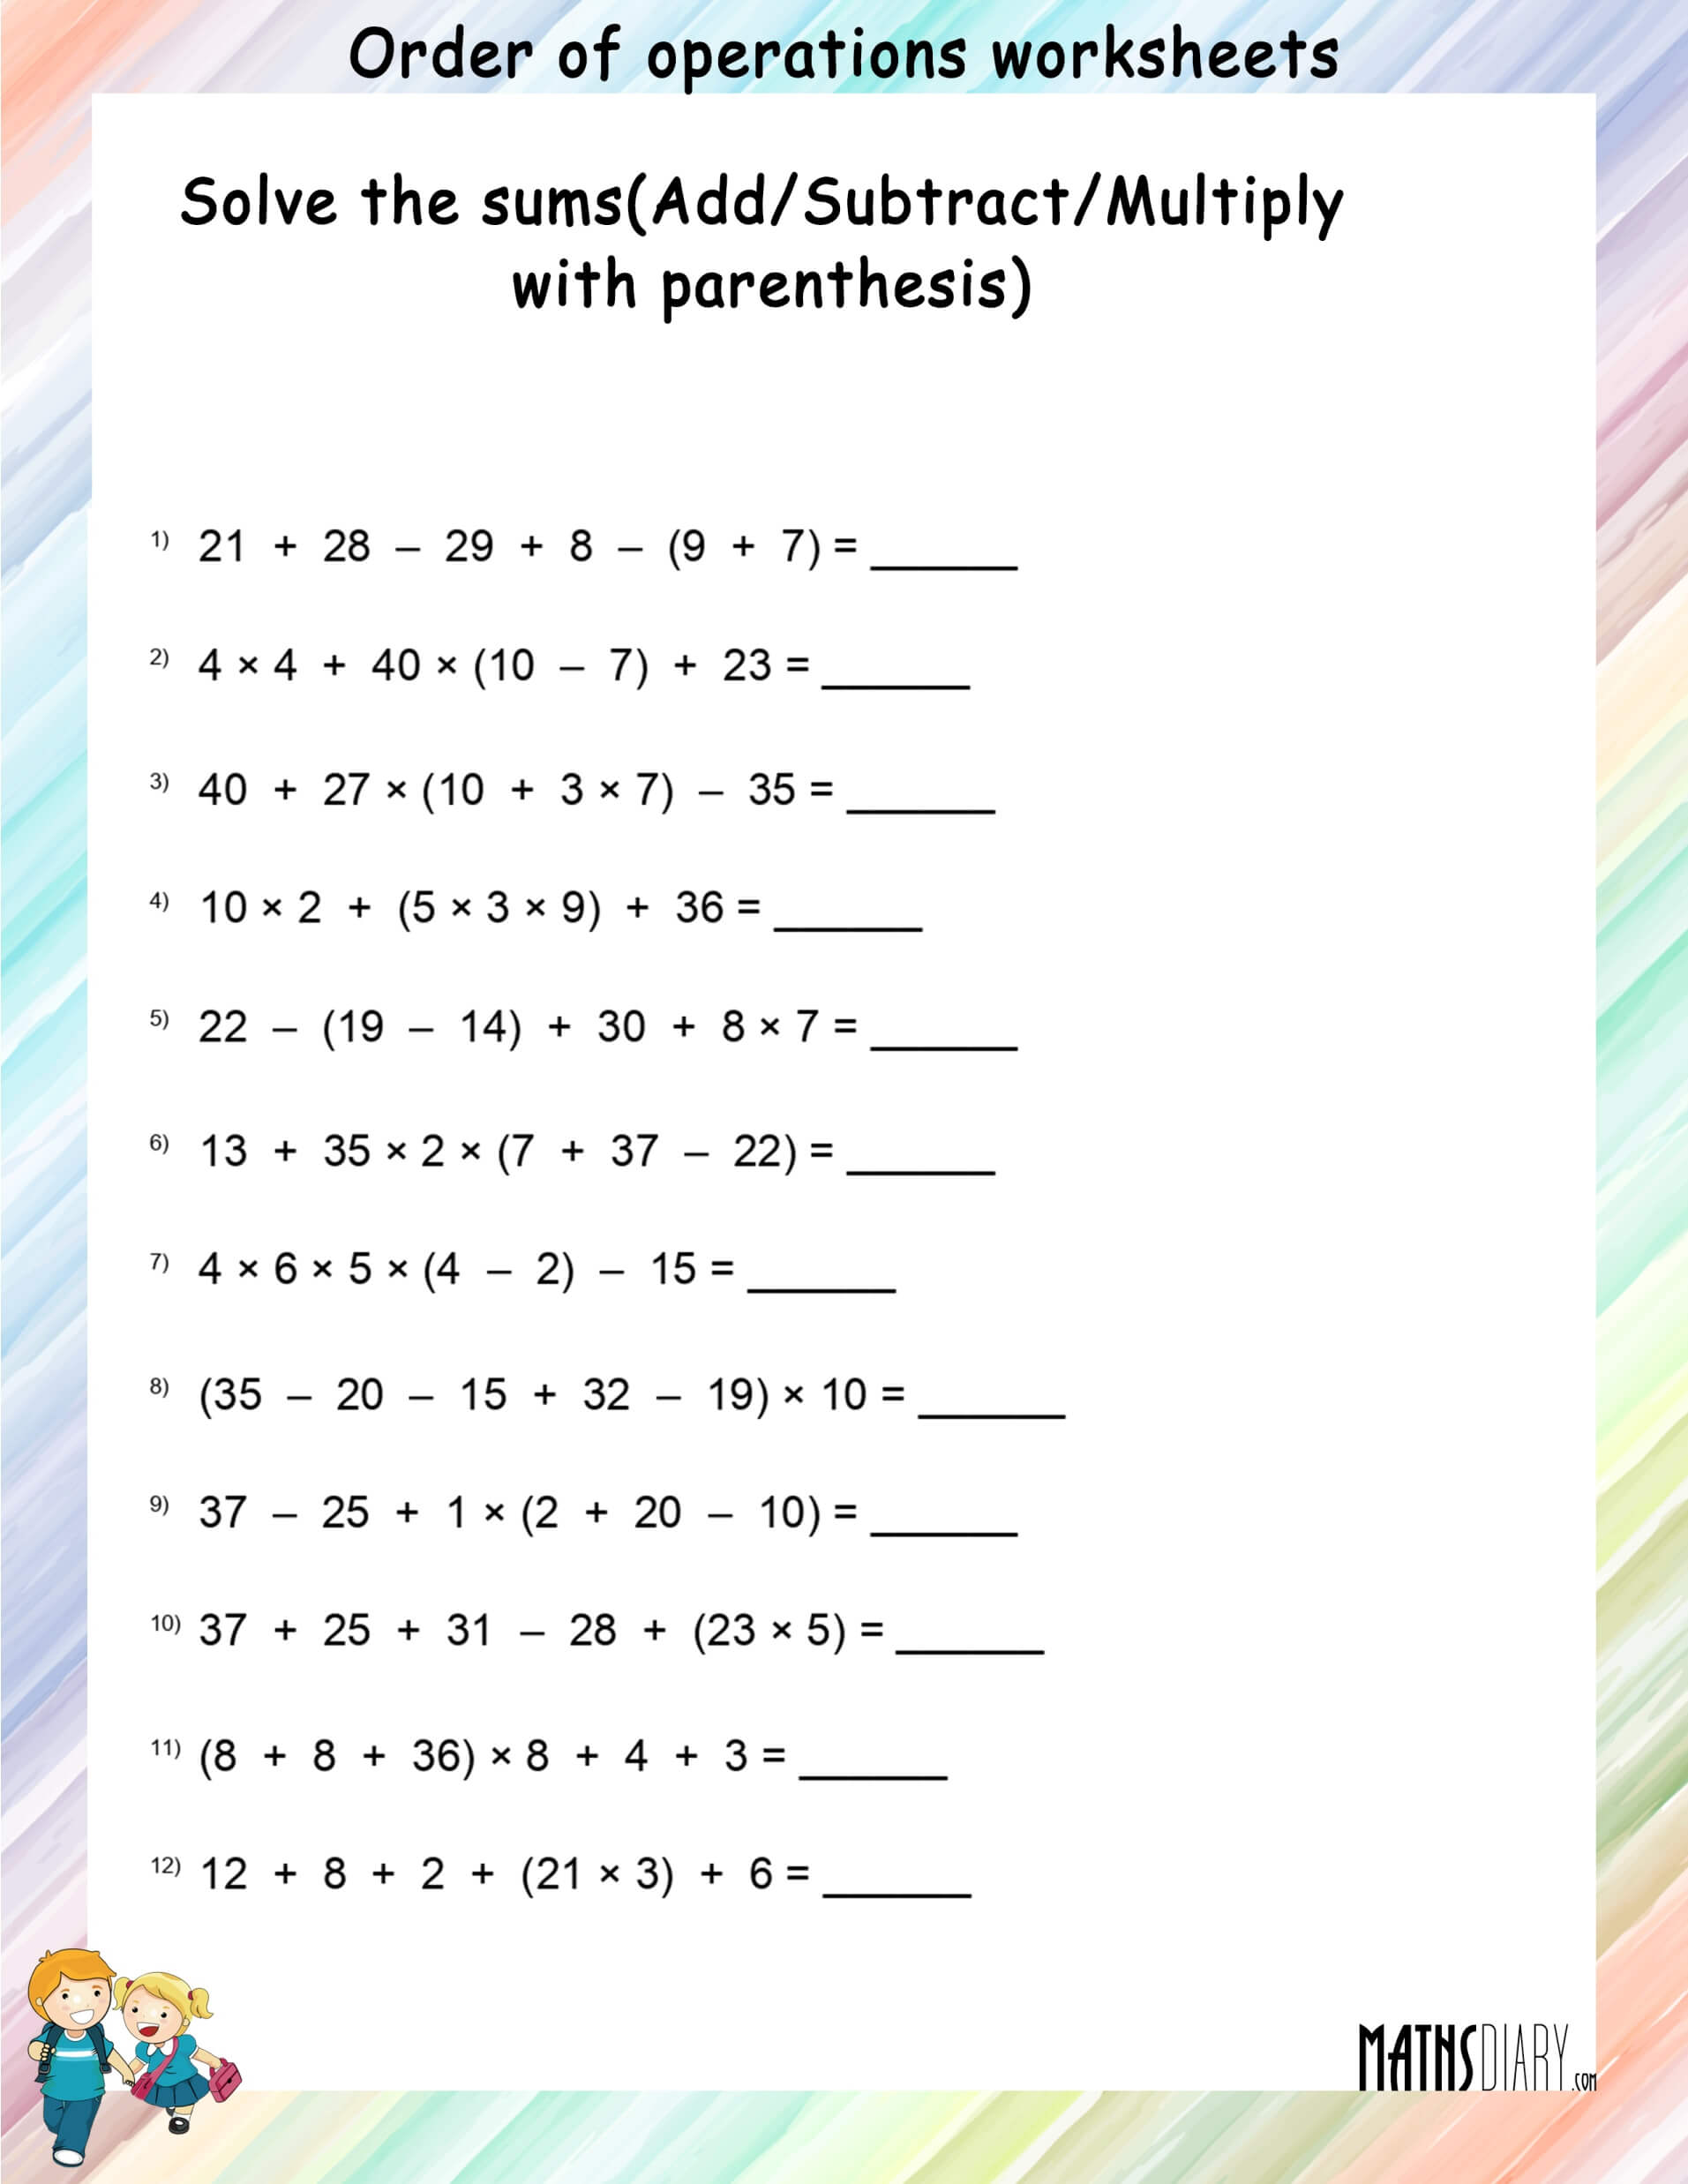 grade-3-order-of-operations-worksheets-free-and-printable-k5-learning-printable-primary-math